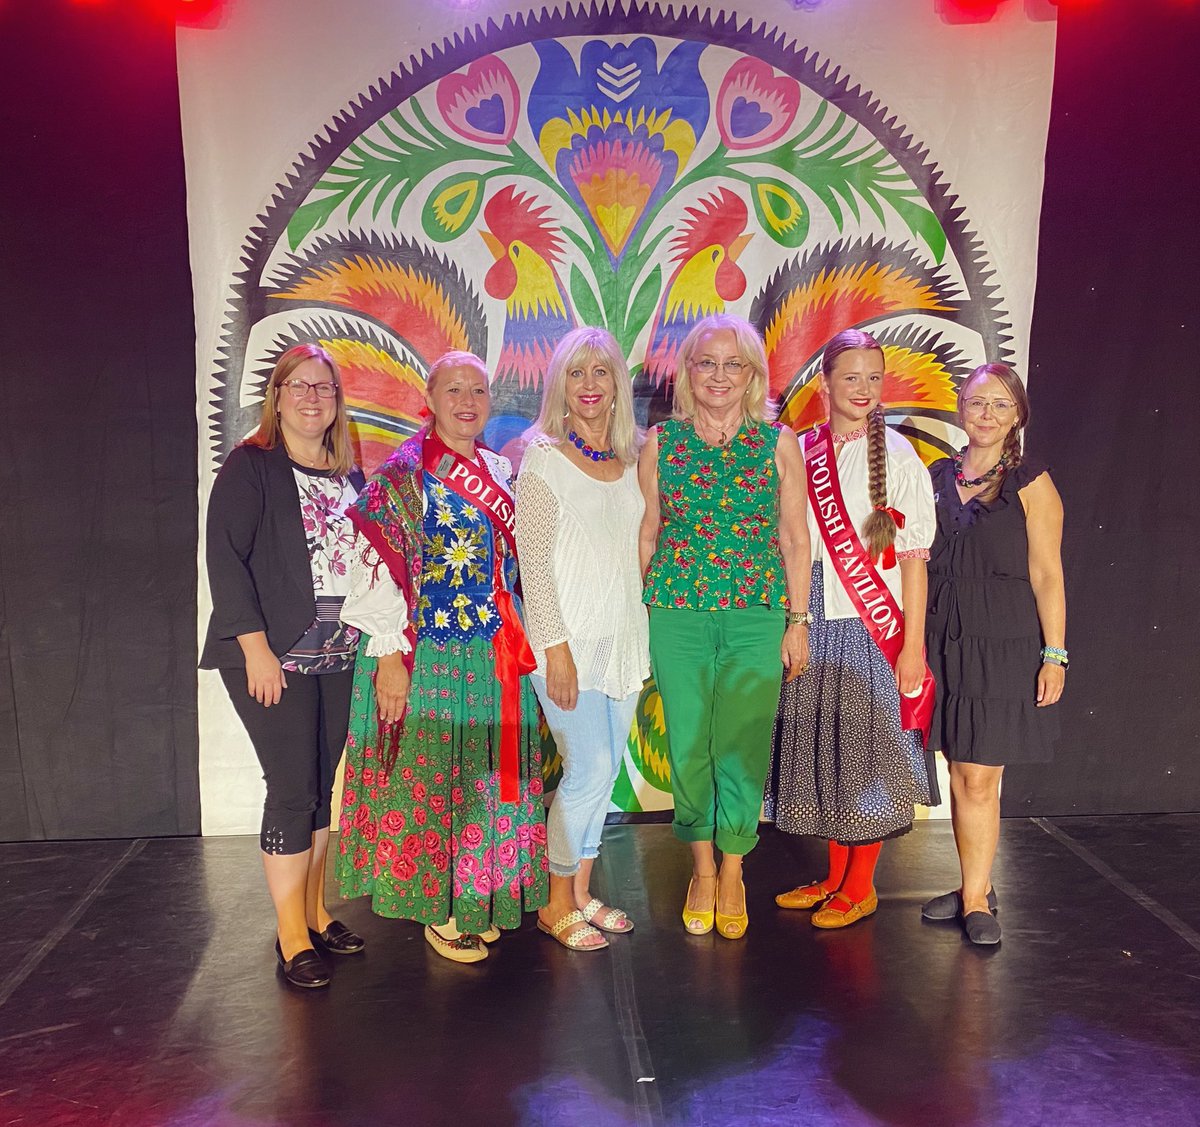 test Twitter Media - The Polish pavilion was so enjoyable! Such talent and warm hospitality from a well organized team.🌟👏

Spending time with friends and colleagues is such a treat.❤️ #folklorama https://t.co/hOPgeg5EiP